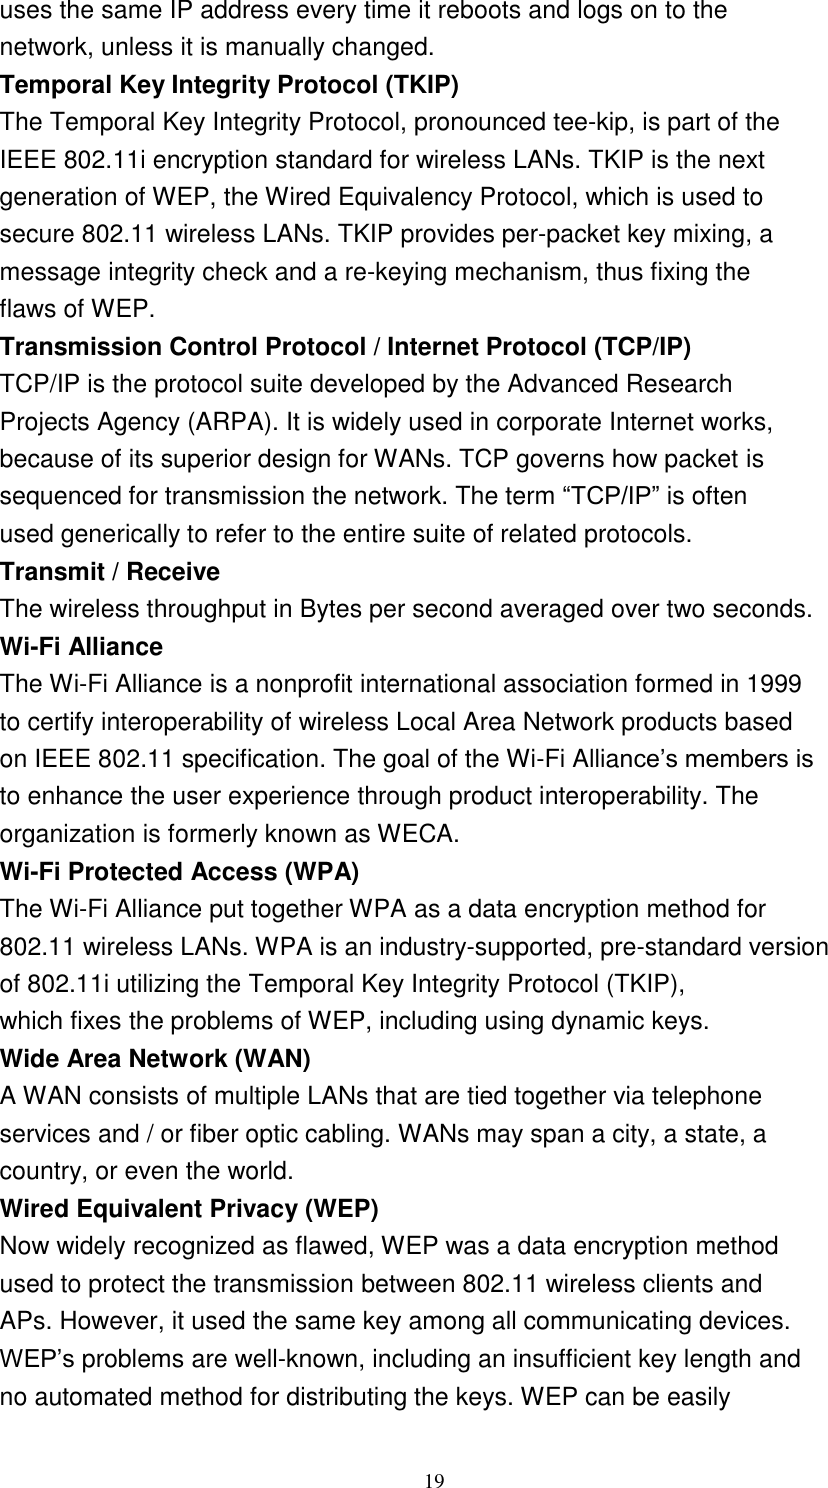 19    uses the same IP address every time it reboots and logs on to the network, unless it is manually changed. Temporal Key Integrity Protocol (TKIP) The Temporal Key Integrity Protocol, pronounced tee-kip, is part of the IEEE 802.11i encryption standard for wireless LANs. TKIP is the next generation of WEP, the Wired Equivalency Protocol, which is used to secure 802.11 wireless LANs. TKIP provides per-packet key mixing, a message integrity check and a re-keying mechanism, thus fixing the flaws of WEP. Transmission Control Protocol / Internet Protocol (TCP/IP) TCP/IP is the protocol suite developed by the Advanced Research Projects Agency (ARPA). It is widely used in corporate Internet works, because of its superior design for WANs. TCP governs how packet is sequenced for transmission the network. The term “TCP/IP” is often used generically to refer to the entire suite of related protocols. Transmit / Receive The wireless throughput in Bytes per second averaged over two seconds. Wi-Fi Alliance The Wi-Fi Alliance is a nonprofit international association formed in 1999 to certify interoperability of wireless Local Area Network products based on IEEE 802.11 specification. The goal of the Wi-Fi Alliance’s members is to enhance the user experience through product interoperability. The organization is formerly known as WECA. Wi-Fi Protected Access (WPA) The Wi-Fi Alliance put together WPA as a data encryption method for 802.11 wireless LANs. WPA is an industry-supported, pre-standard version of 802.11i utilizing the Temporal Key Integrity Protocol (TKIP), which fixes the problems of WEP, including using dynamic keys. Wide Area Network (WAN) A WAN consists of multiple LANs that are tied together via telephone services and / or fiber optic cabling. WANs may span a city, a state, a country, or even the world. Wired Equivalent Privacy (WEP) Now widely recognized as flawed, WEP was a data encryption method used to protect the transmission between 802.11 wireless clients and APs. However, it used the same key among all communicating devices. WEP’s problems are well-known, including an insufficient key length and no automated method for distributing the keys. WEP can be easily 